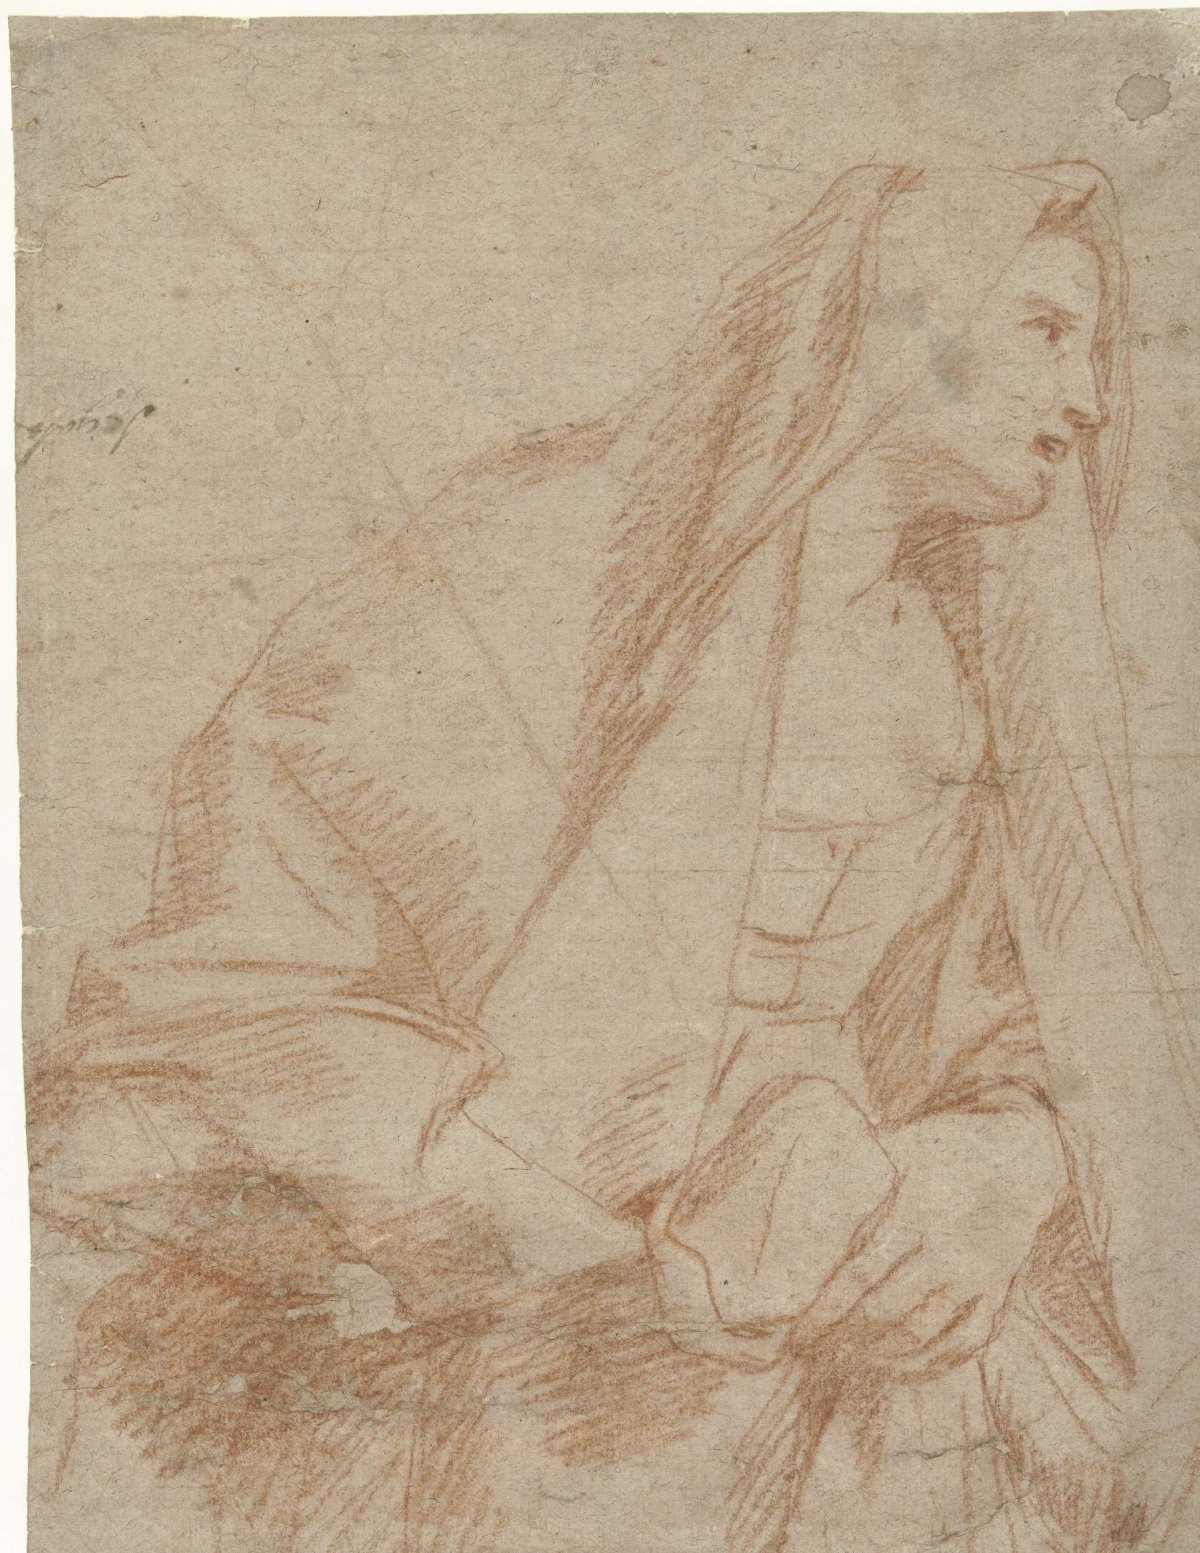 Standing woman, to the right, with a cloth over her head, Giovanni Segala, 1643 - 1720